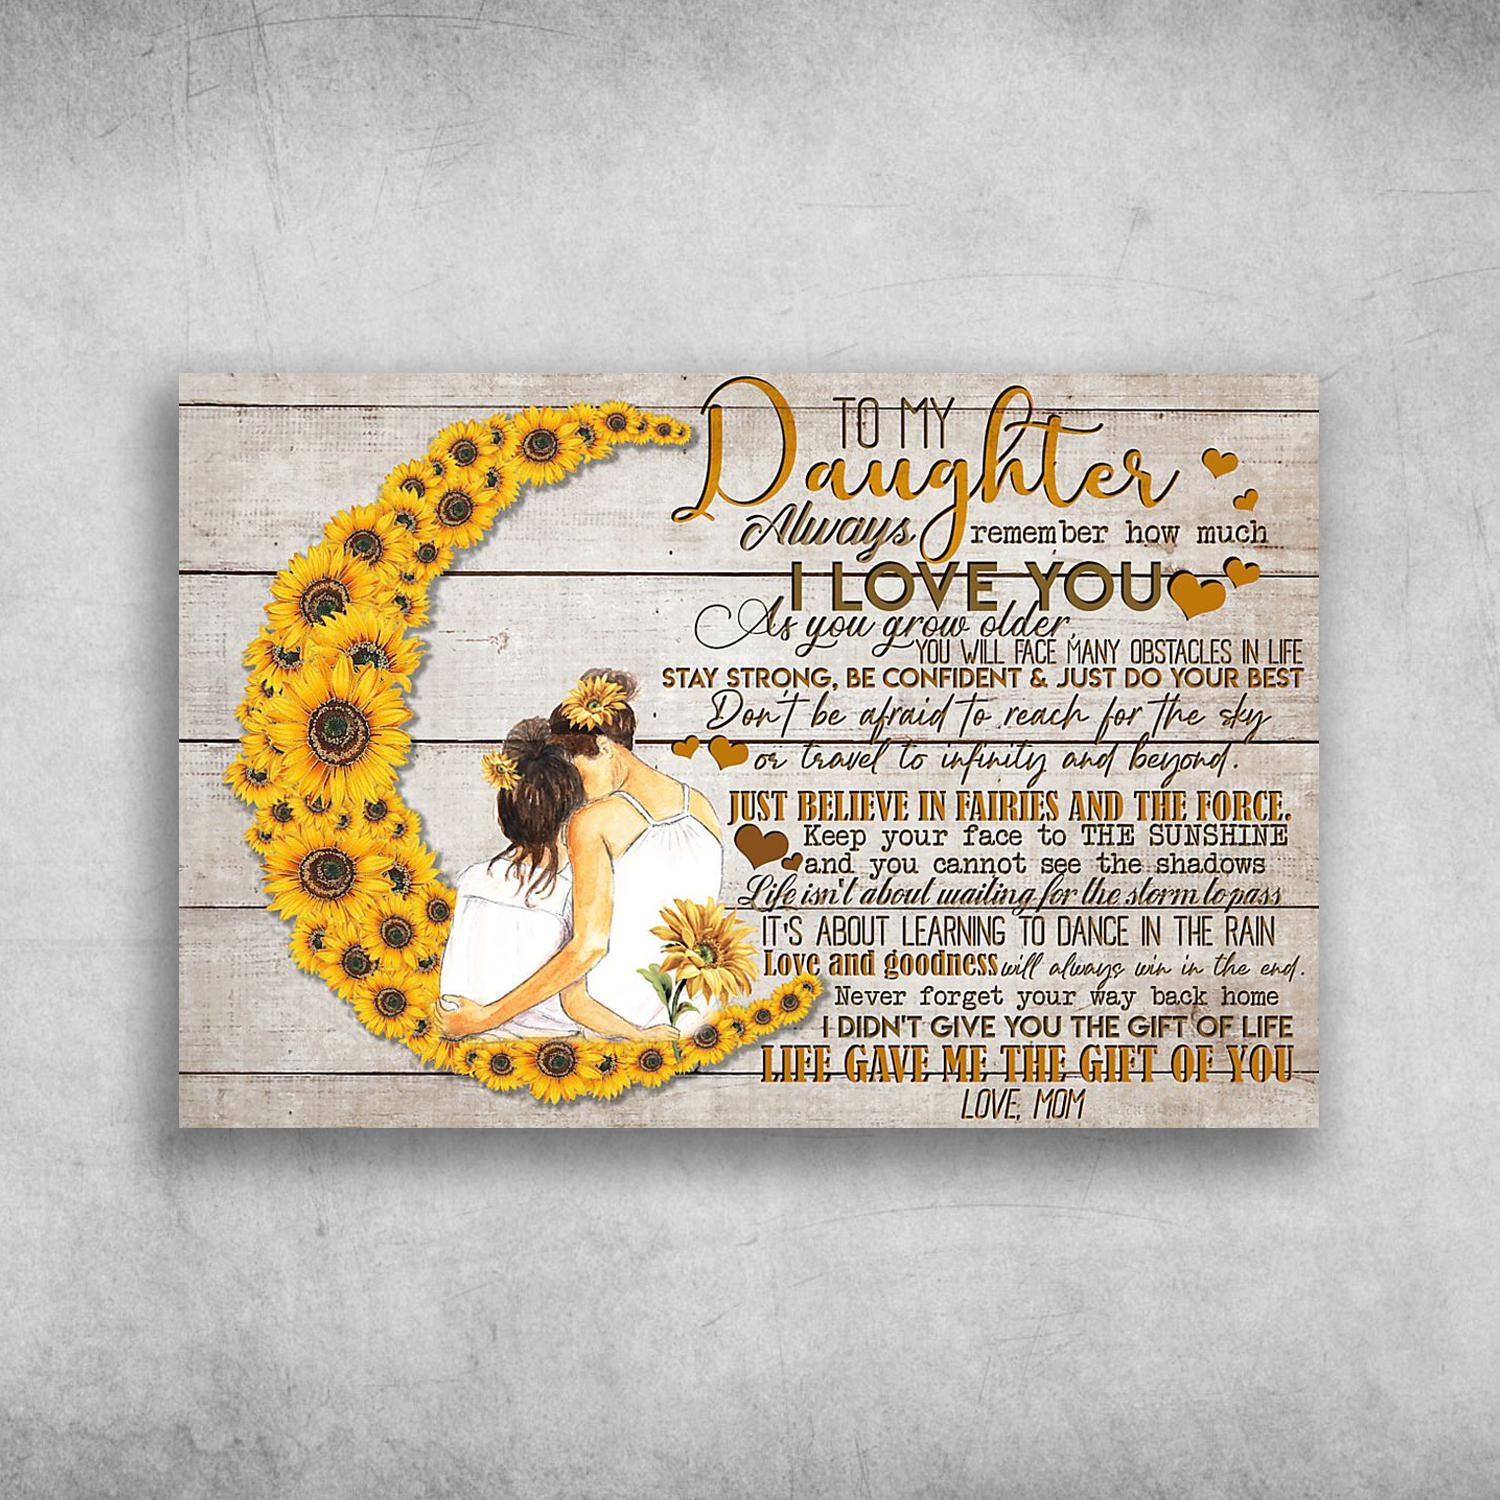 To My Daughter Life Gave Me The Gift Of You Love Mom Poster Print Wall Art Canvas Wall Decor